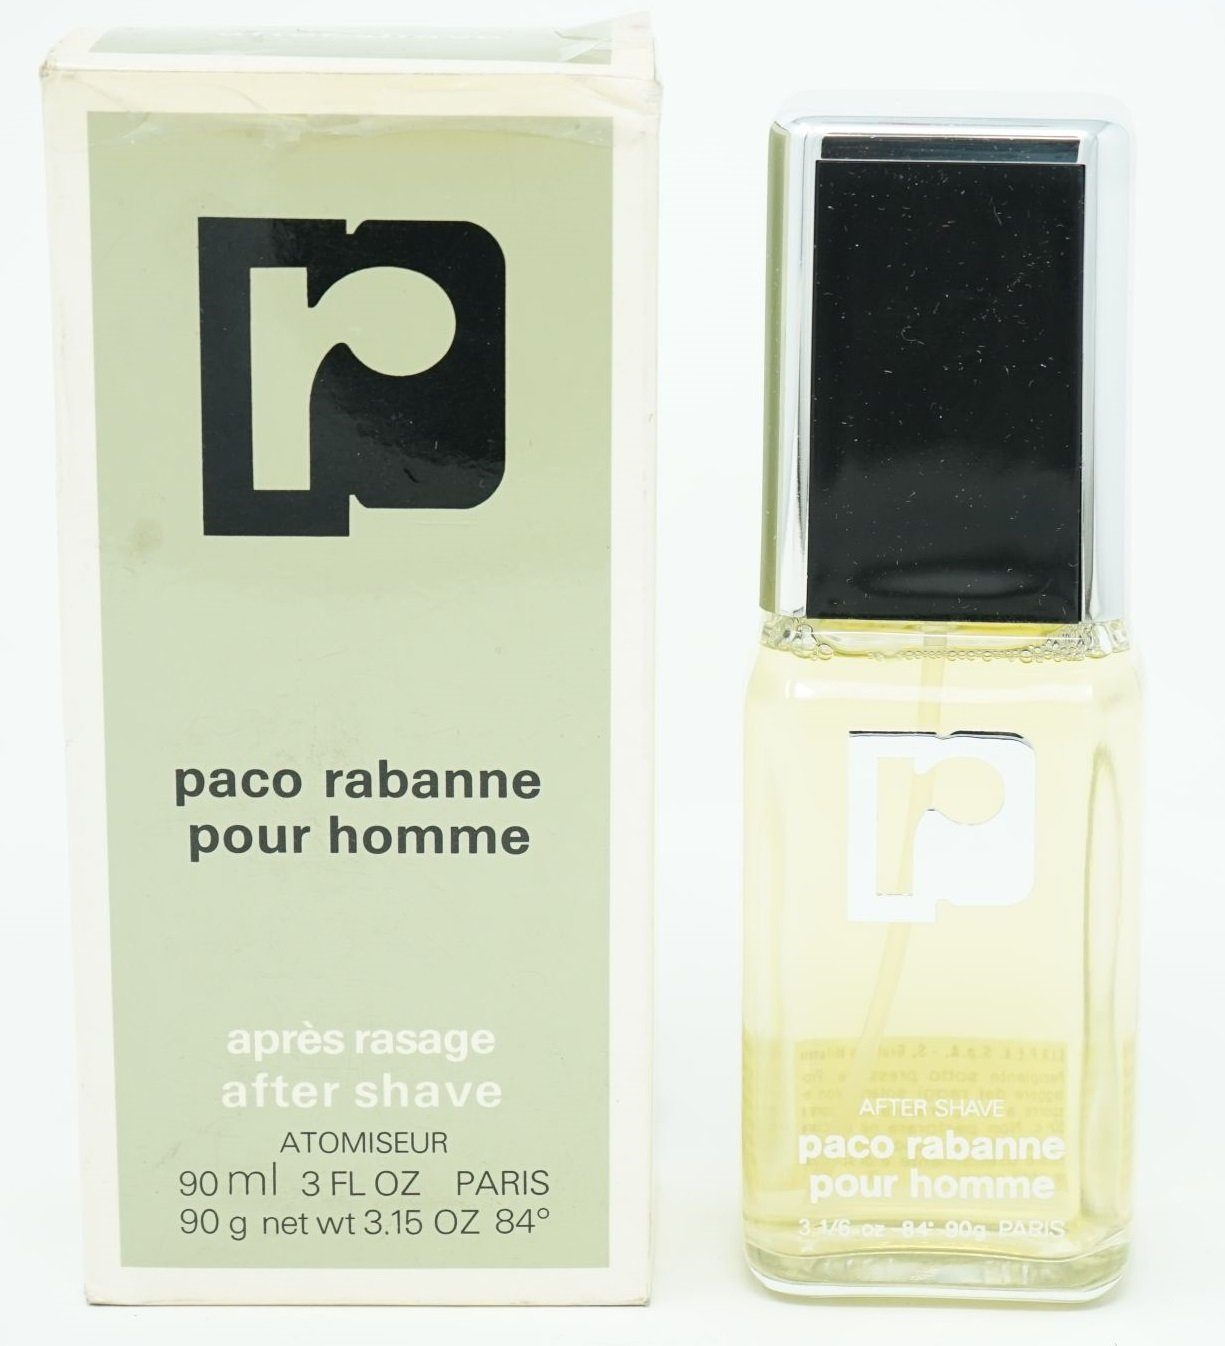 paco rabanne After-Shave Paco Shave Rabanne Homme Atomiseur Pour 90 ml After